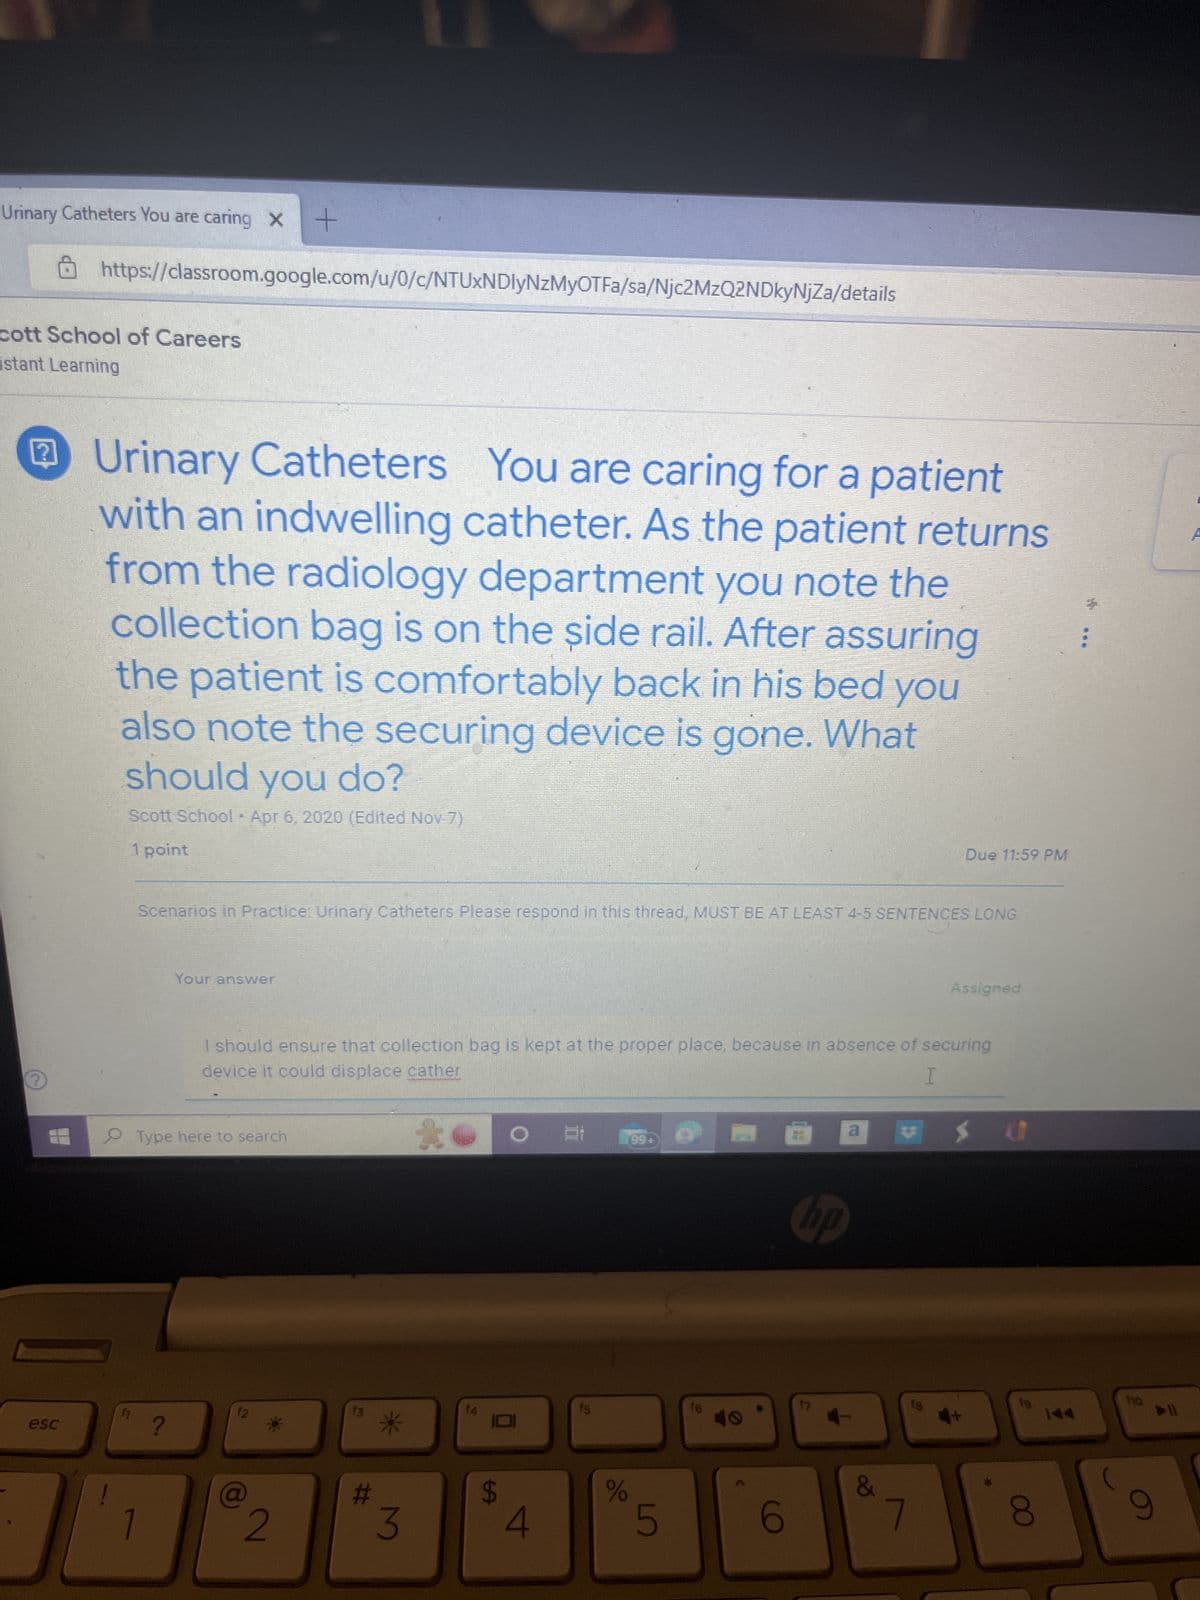 Urinary Catheters You are caring x +
cott School of Careers
istant Learning
2
https://classroom.google.com/u/0/c/NTUxNDIyNzMyOTFa/sa/Njc2MzQ2NDkyNjZa/details
esc
Urinary Catheters You are caring for a patient
with an indwelling catheter. As the patient returns
from the radiology department you note the
collection bag is on the side rail. After assuring
the patient is comfortably back in his bed you
also note the securing device is gone. What
should you do?
Scott School Apr 6, 2020 (Edited Nov-7)
1 point
f1
*
Scenarios in Practice: Urinary Catheters Please respond in this thread, MUST BE AT LEAST 4-5 SENTENCES LONG
1
?
Your answer
Type here to search
I should ensure that collection bag is kept at the proper place, because in absence of securing
device it could displace cather
I
*
2
13
#
3
14
LA
4
99+
%
5
16
6
a
hp
17
Due 11:59 PM
&
7
Assigned
$0
8
***
▶I
9
A